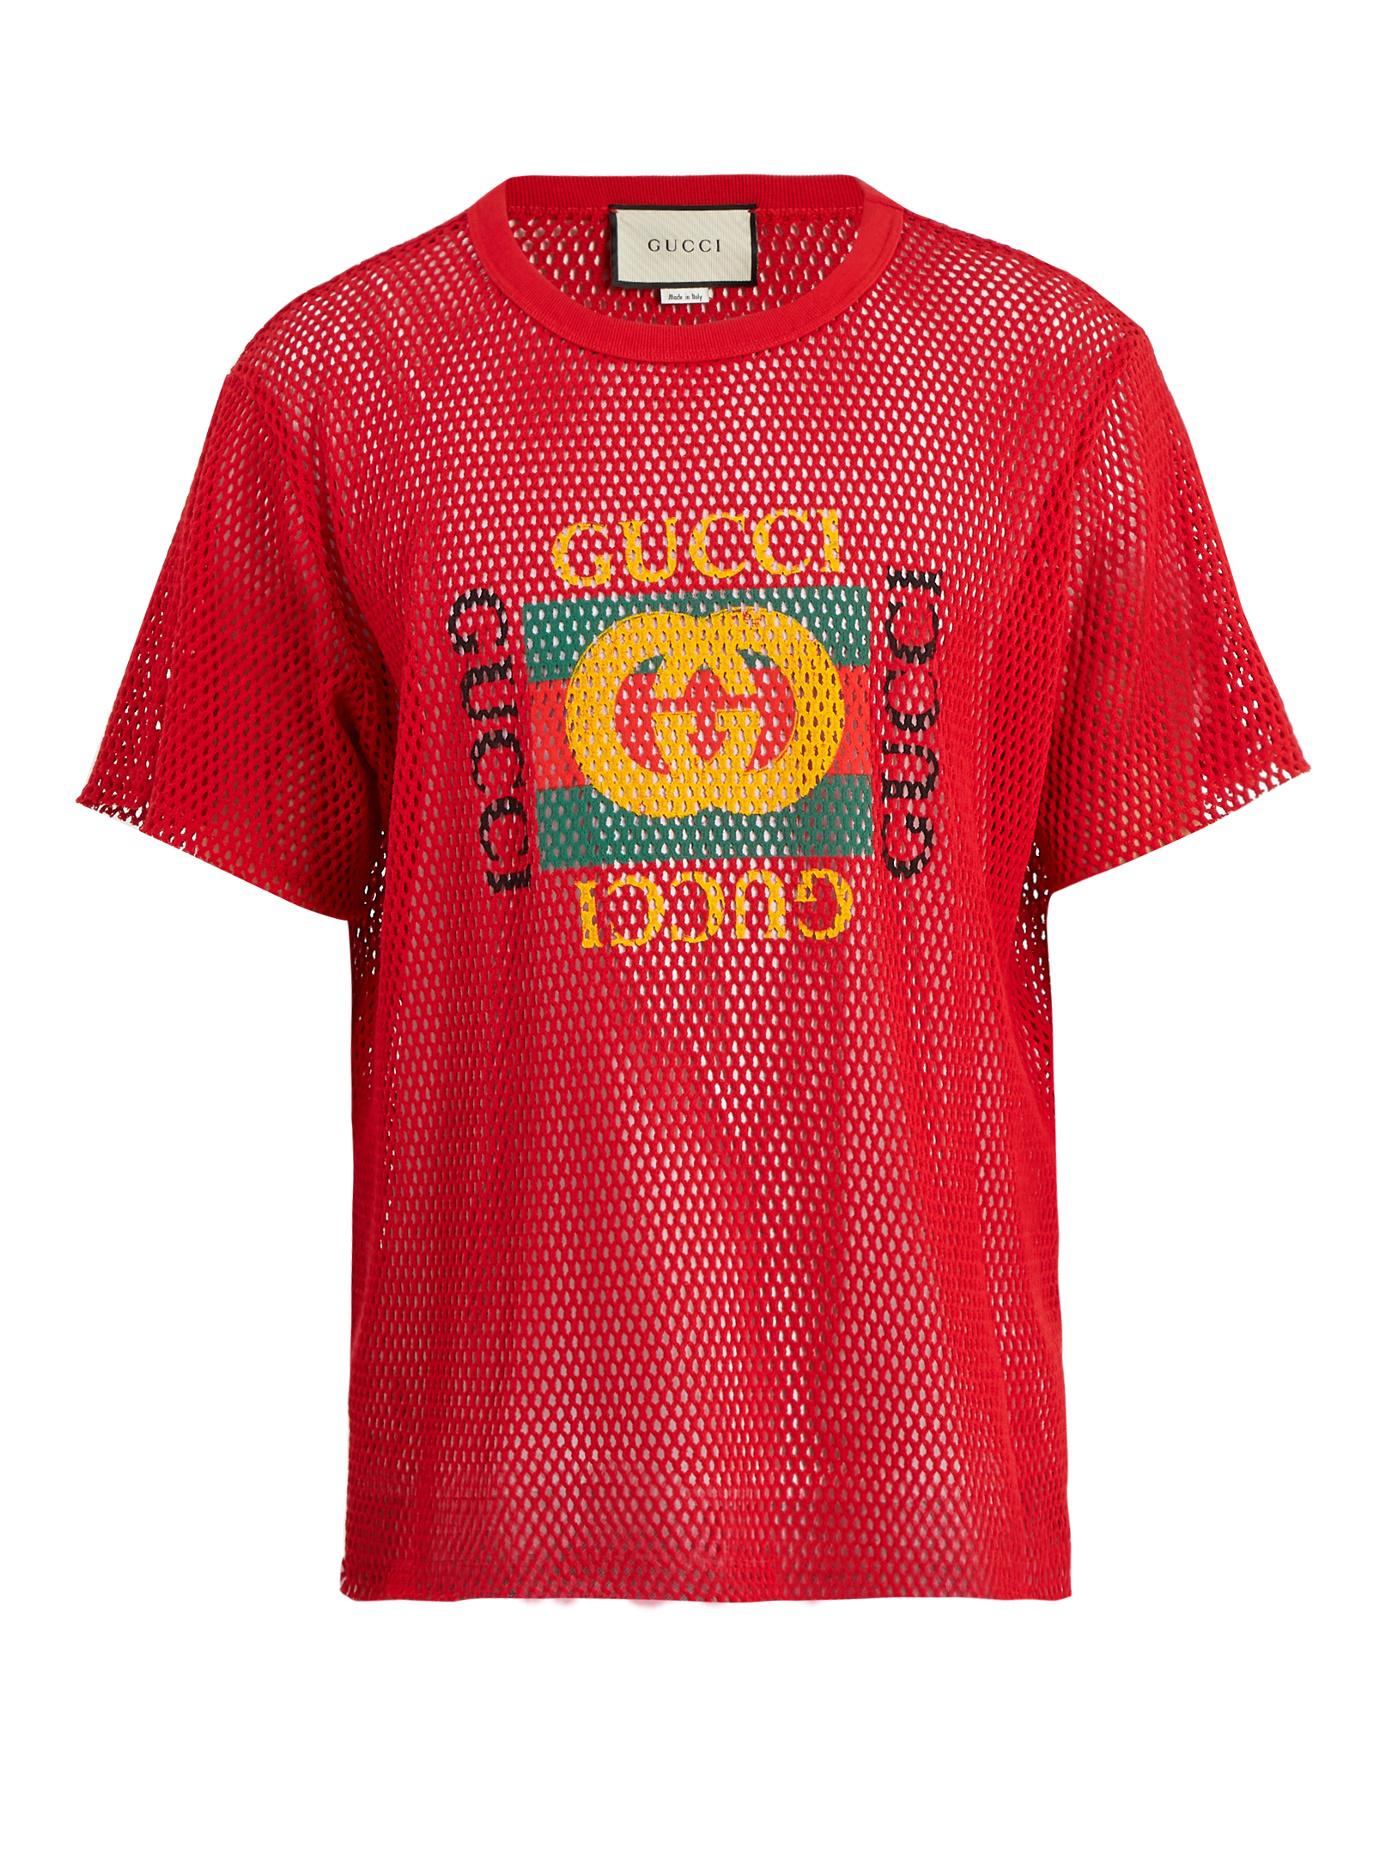 Lyst - Gucci Logo-print Cotton-blend Mesh T-shirt in Red for Men